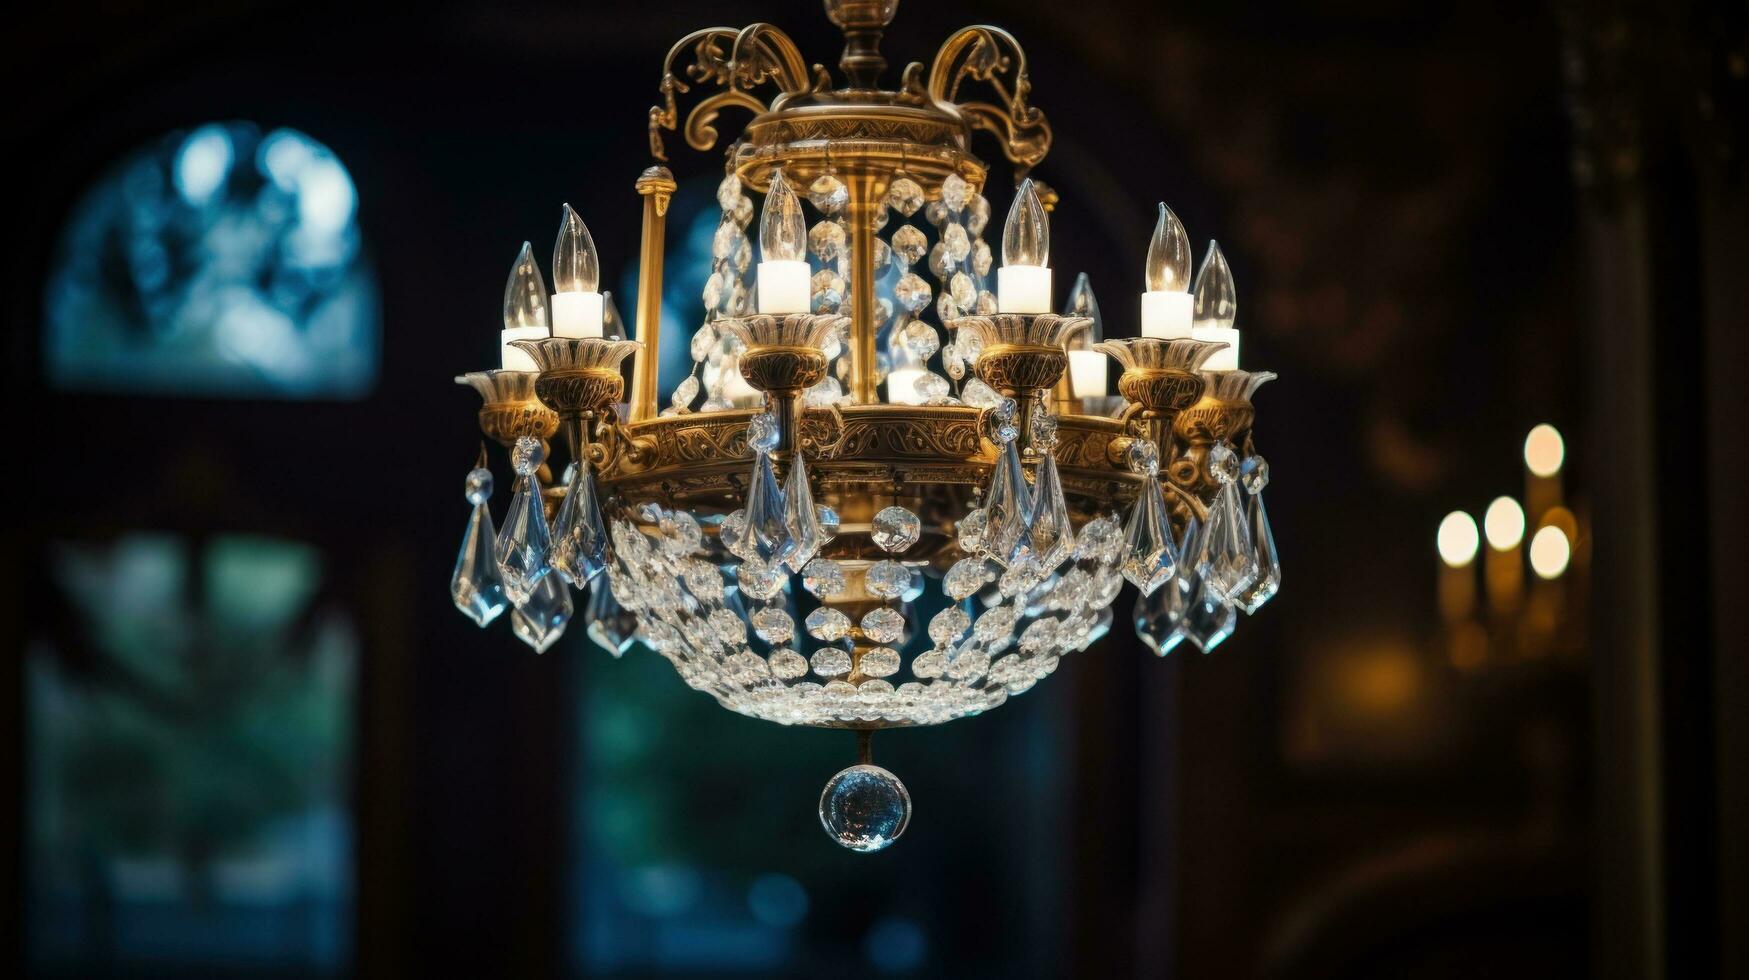 The chandelier hangs gracefully from the ceiling, adding a touch of elegance to any room photo